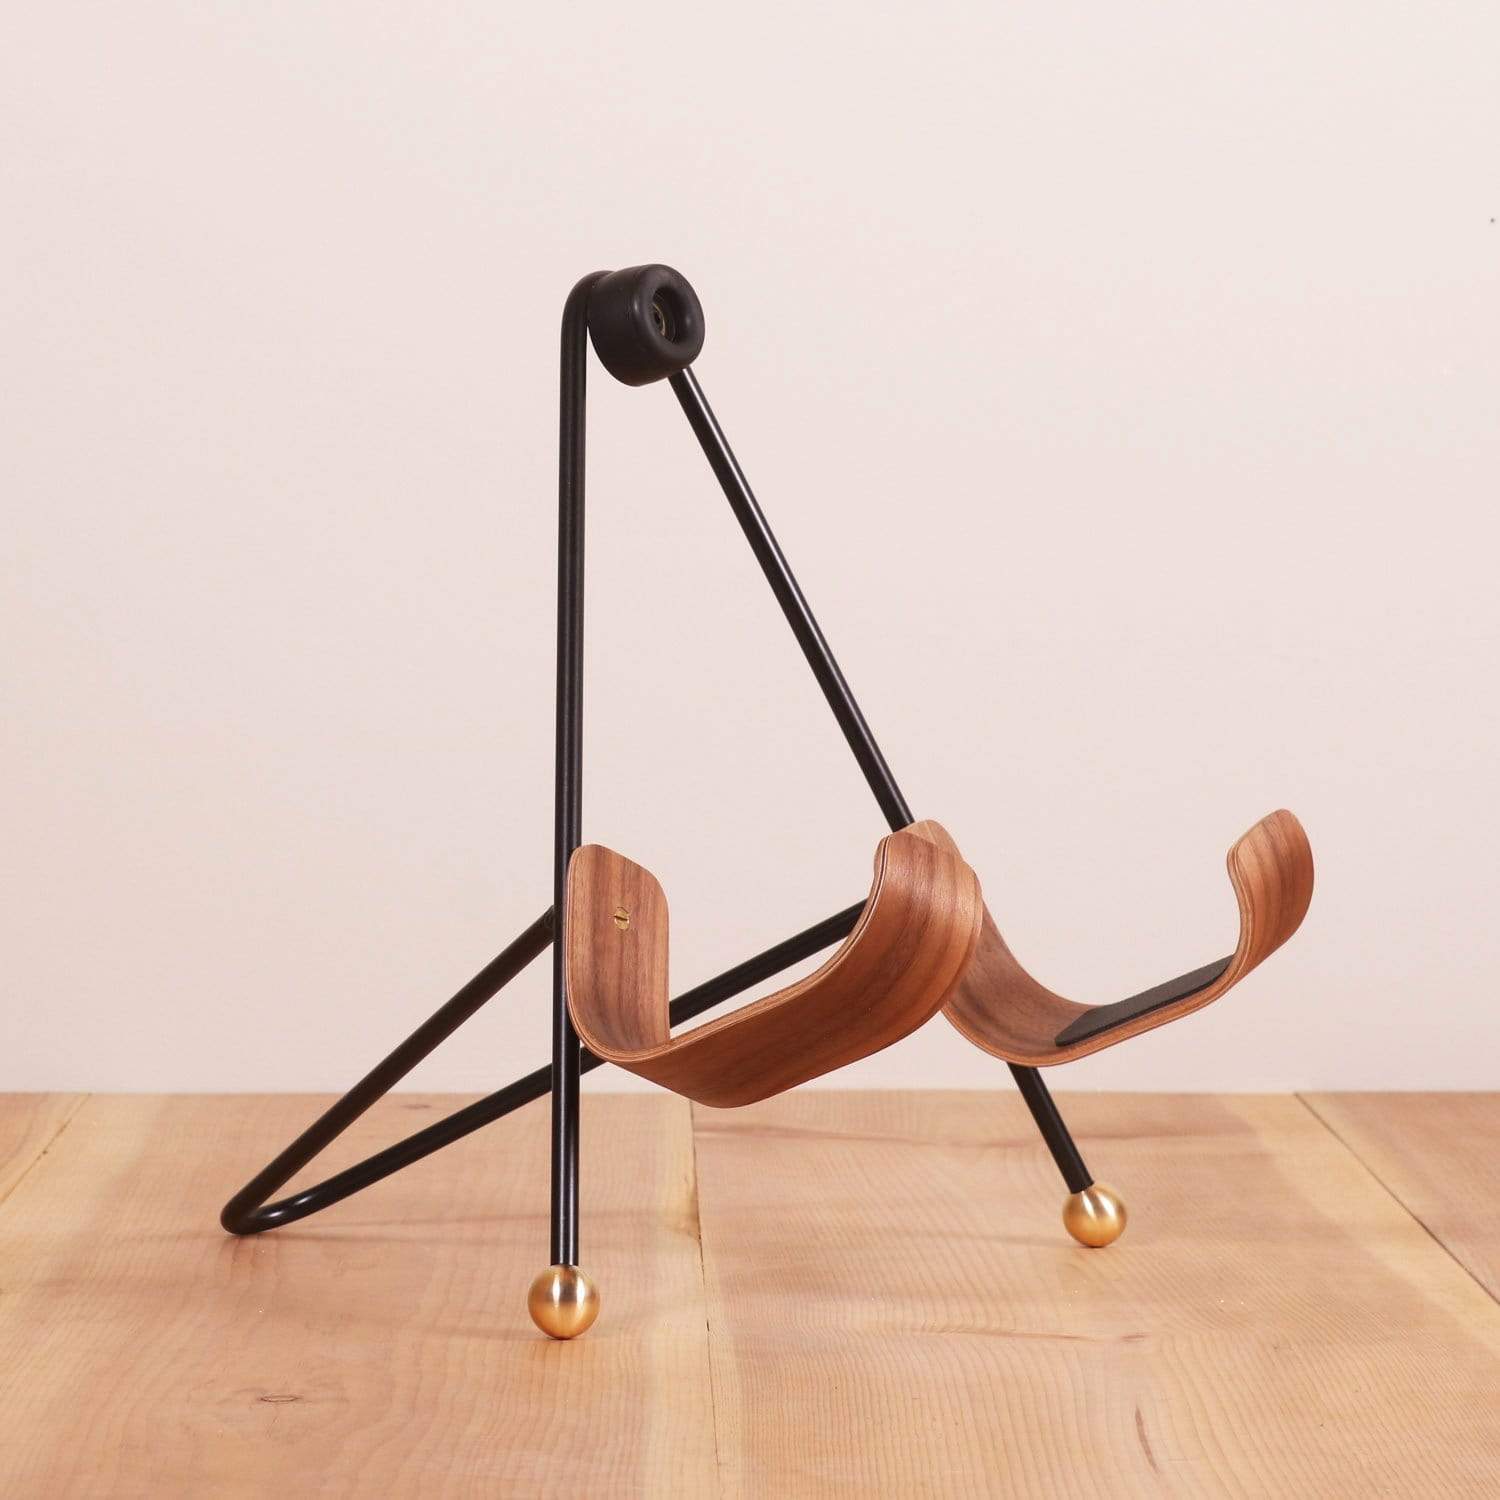 A Black guitar stand with wooden guitar body rests 